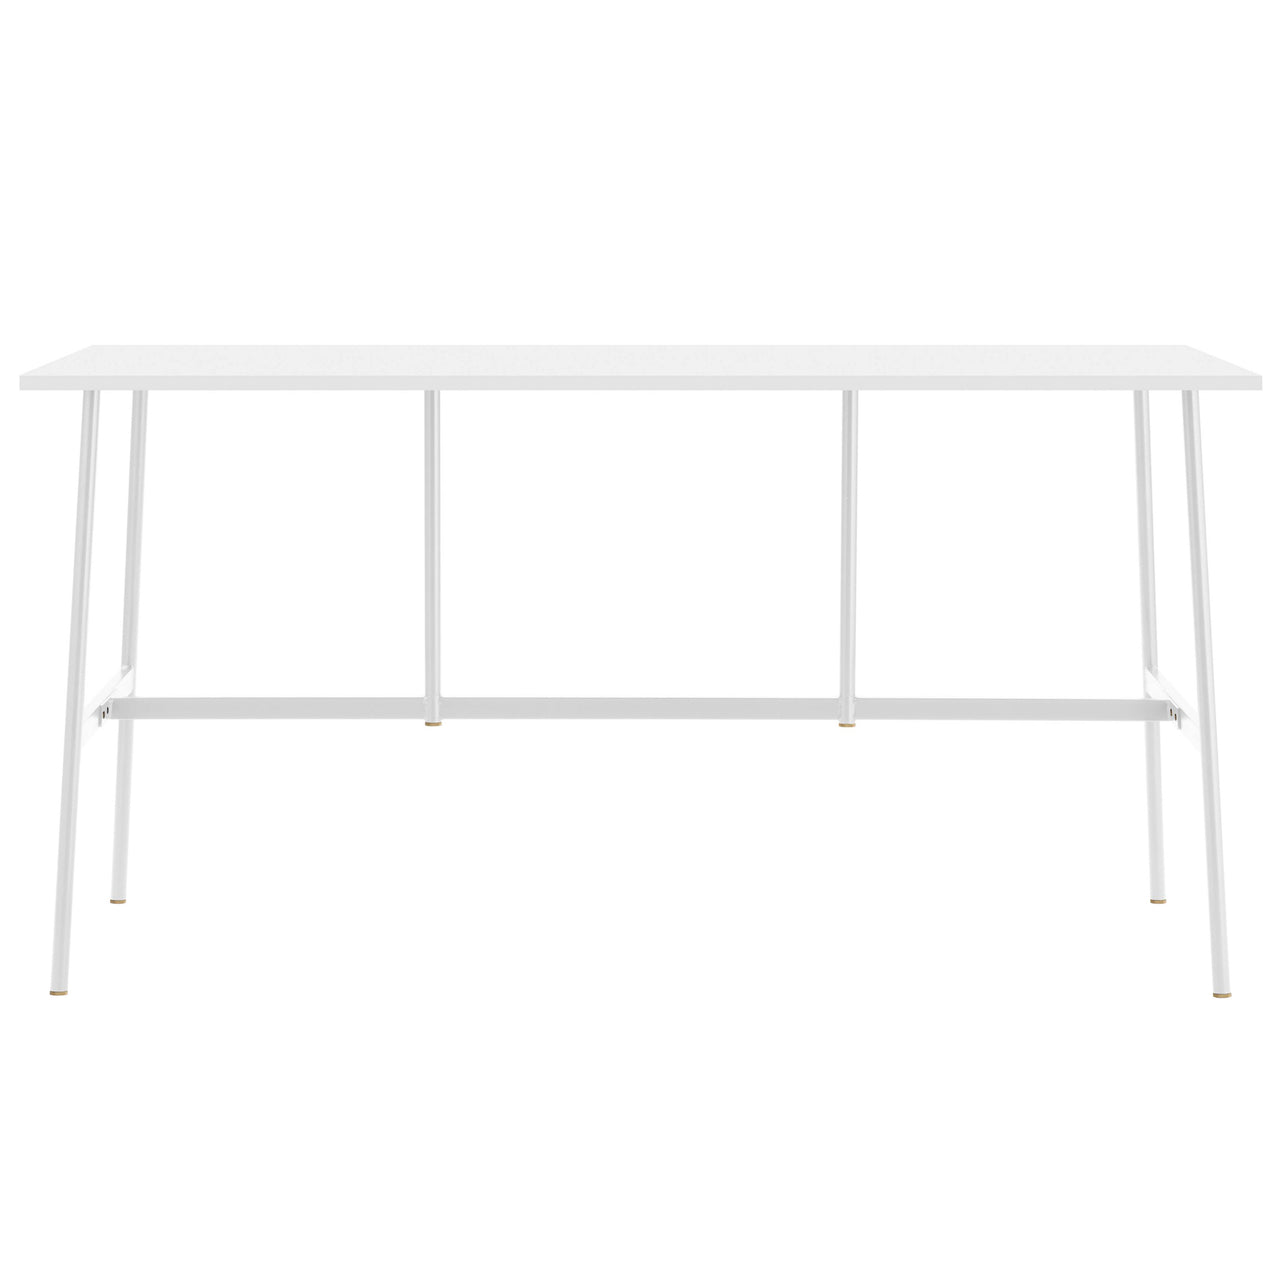 Union Bar Table: Low + Large - 35.4